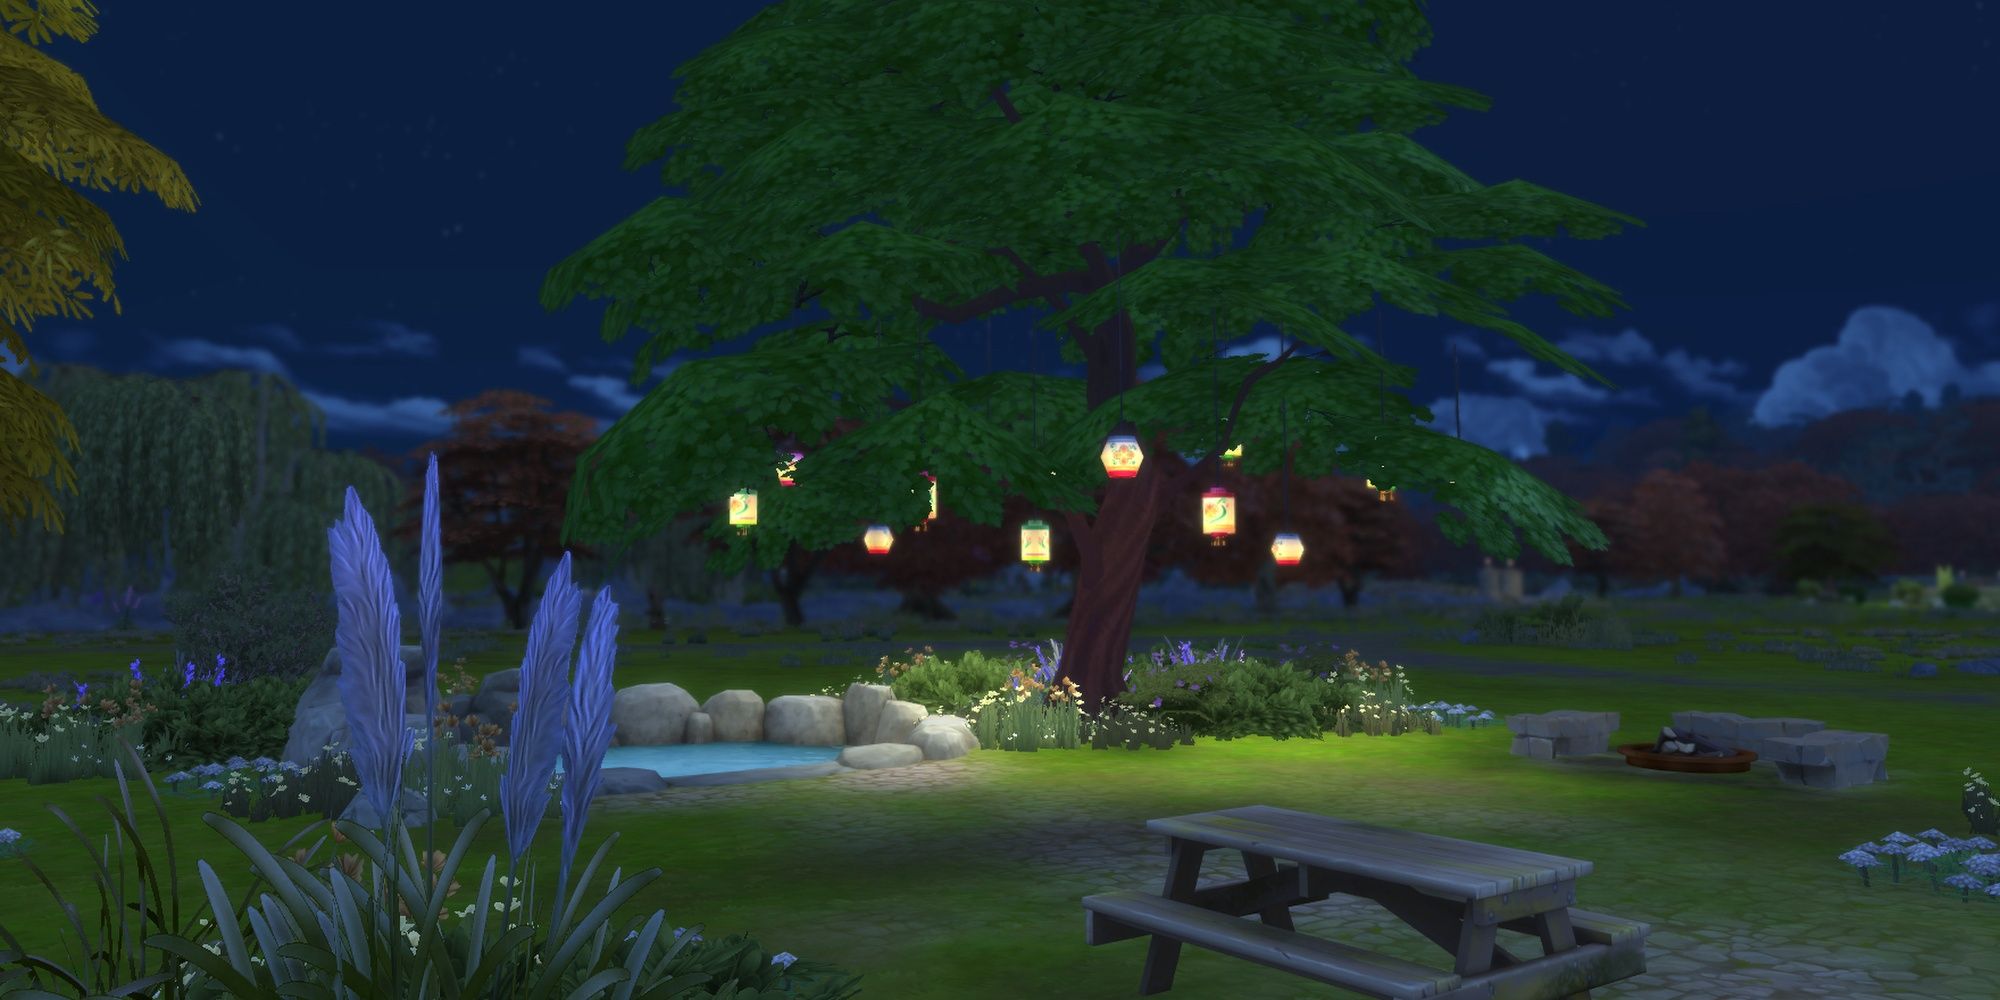 A quiet picnic area in the Sims 4 with a large oak tree holding numerous paper lanterns at night.